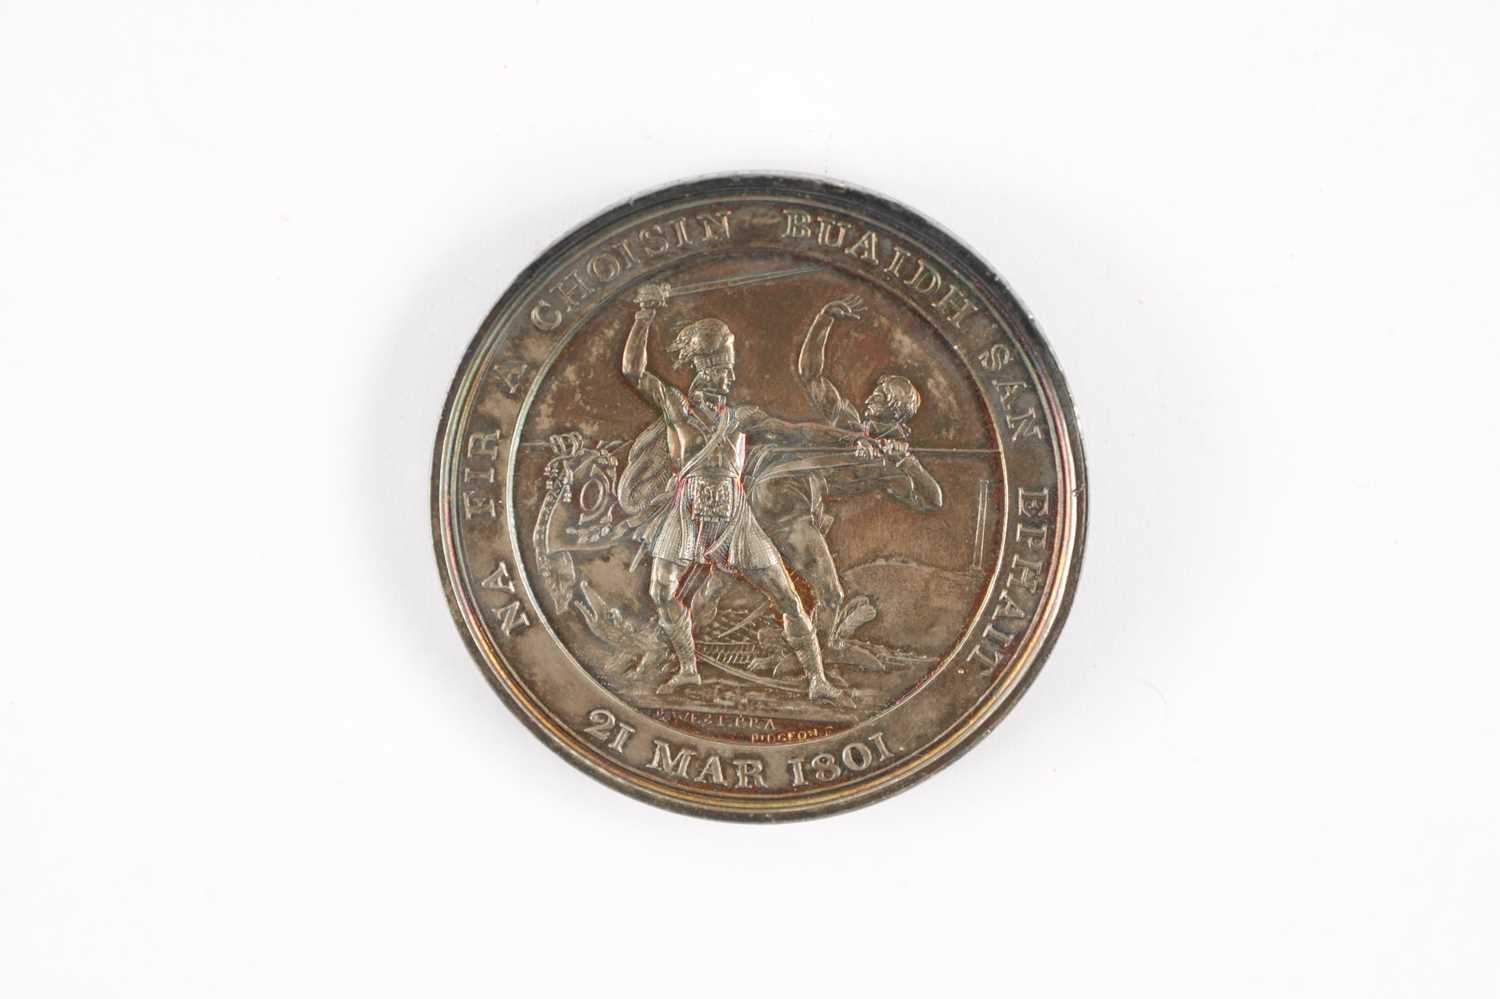 SIR RALPH ABERCROMBY IN EGYPT, LONDON HIGHLAND SOCIETY SILVER MEDAL 1801 - Image 2 of 3